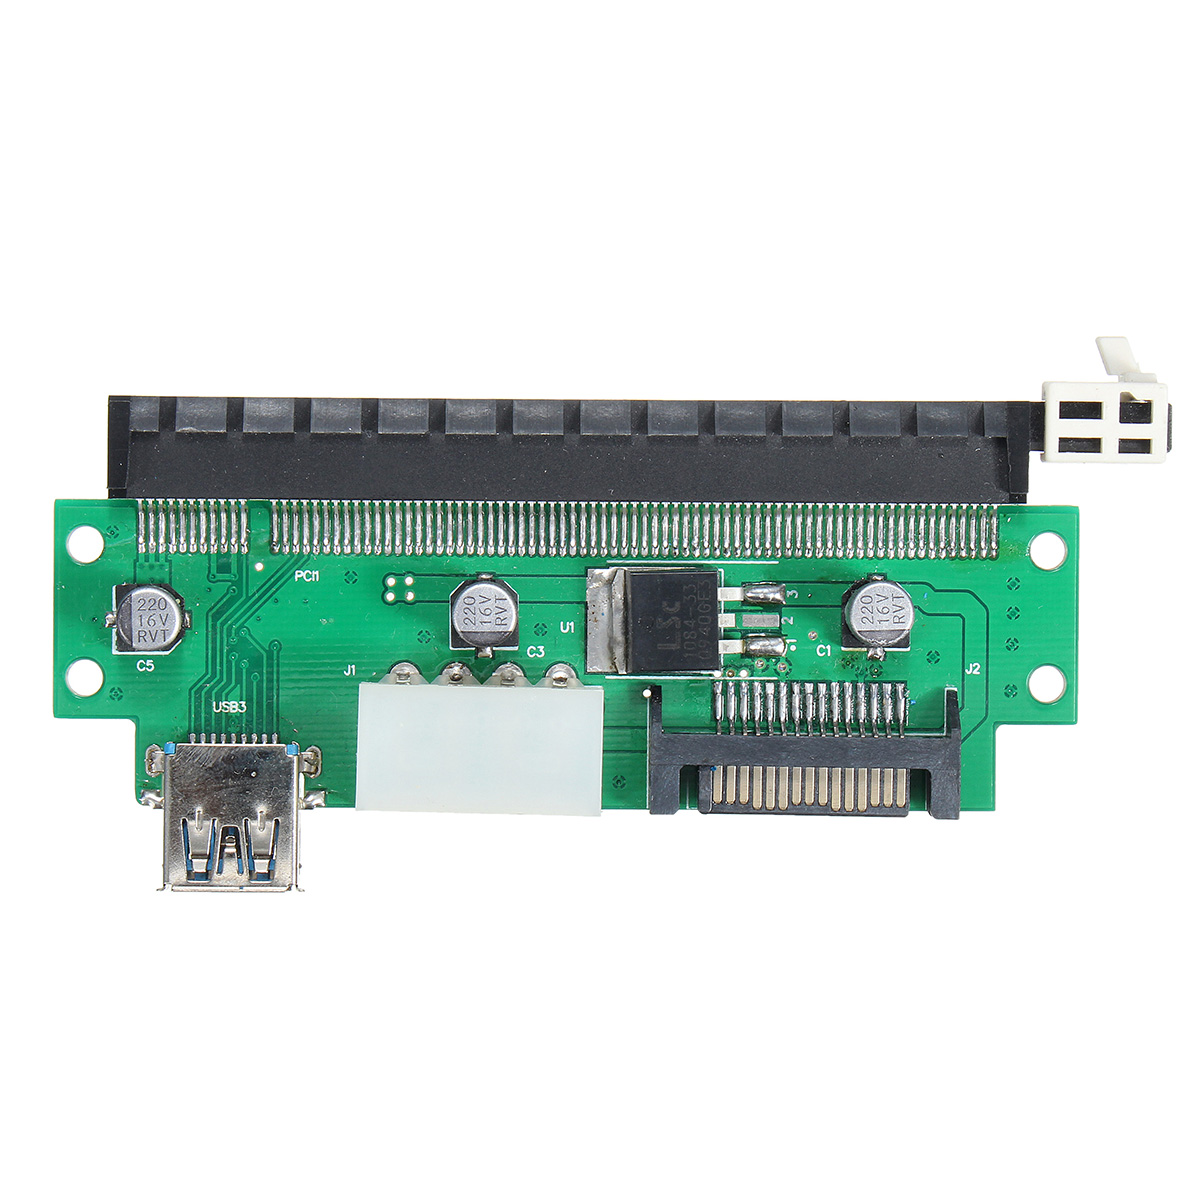 Find PCI E Extender Card Adapter PCI Express 1X to 16X Extender Mining Rig 60cm USB 3 0 6Pin Power Mining Dedicated for Sale on Gipsybee.com with cryptocurrencies